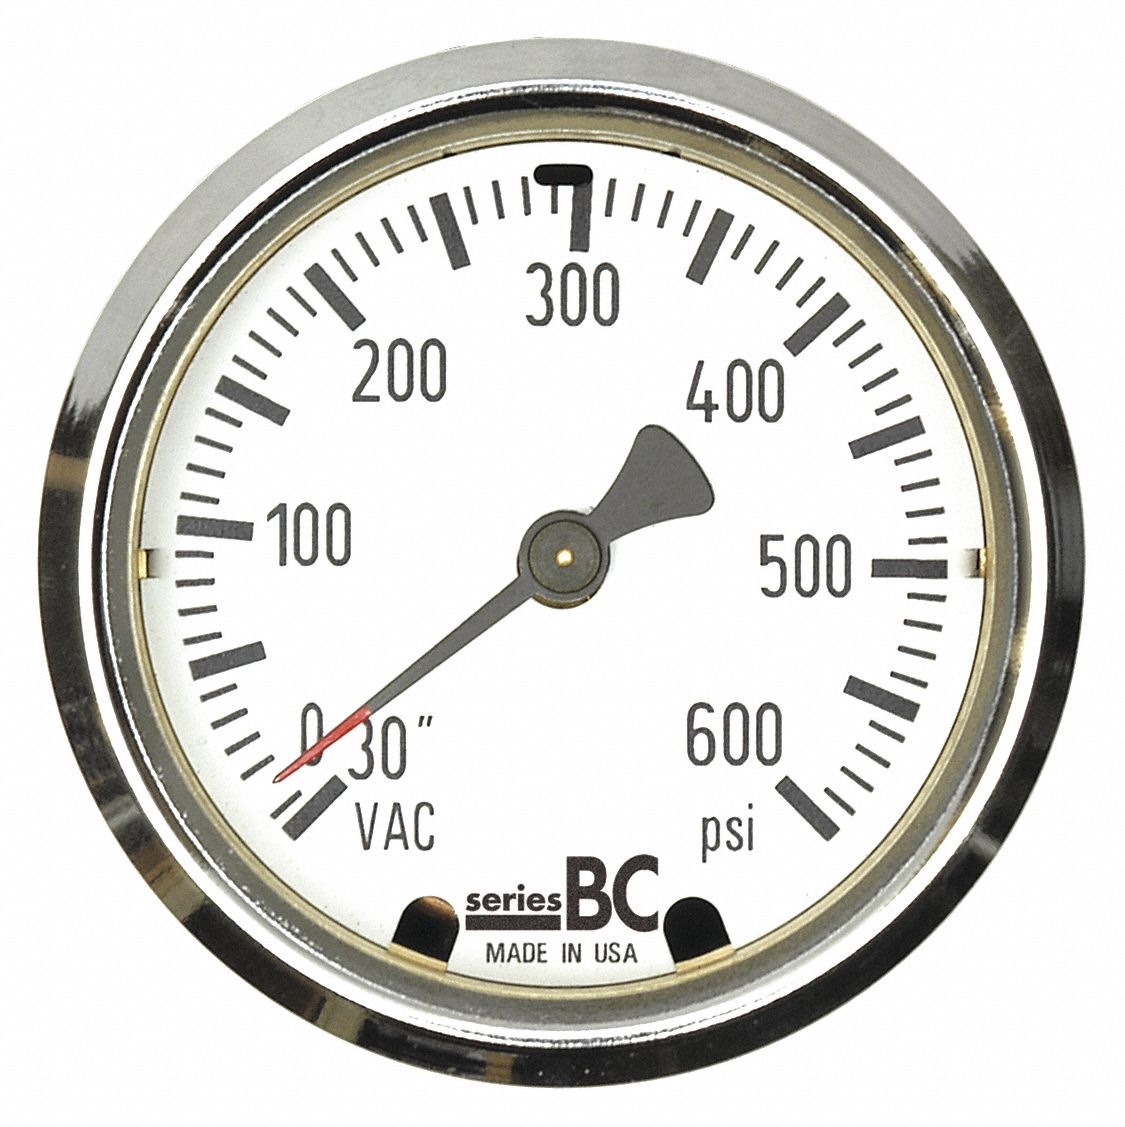 Panel-Mount Compound Gauge: Fire Apparatus Panels, U-Clamp, 30 to 0 to 400 in Hg/psi, BC